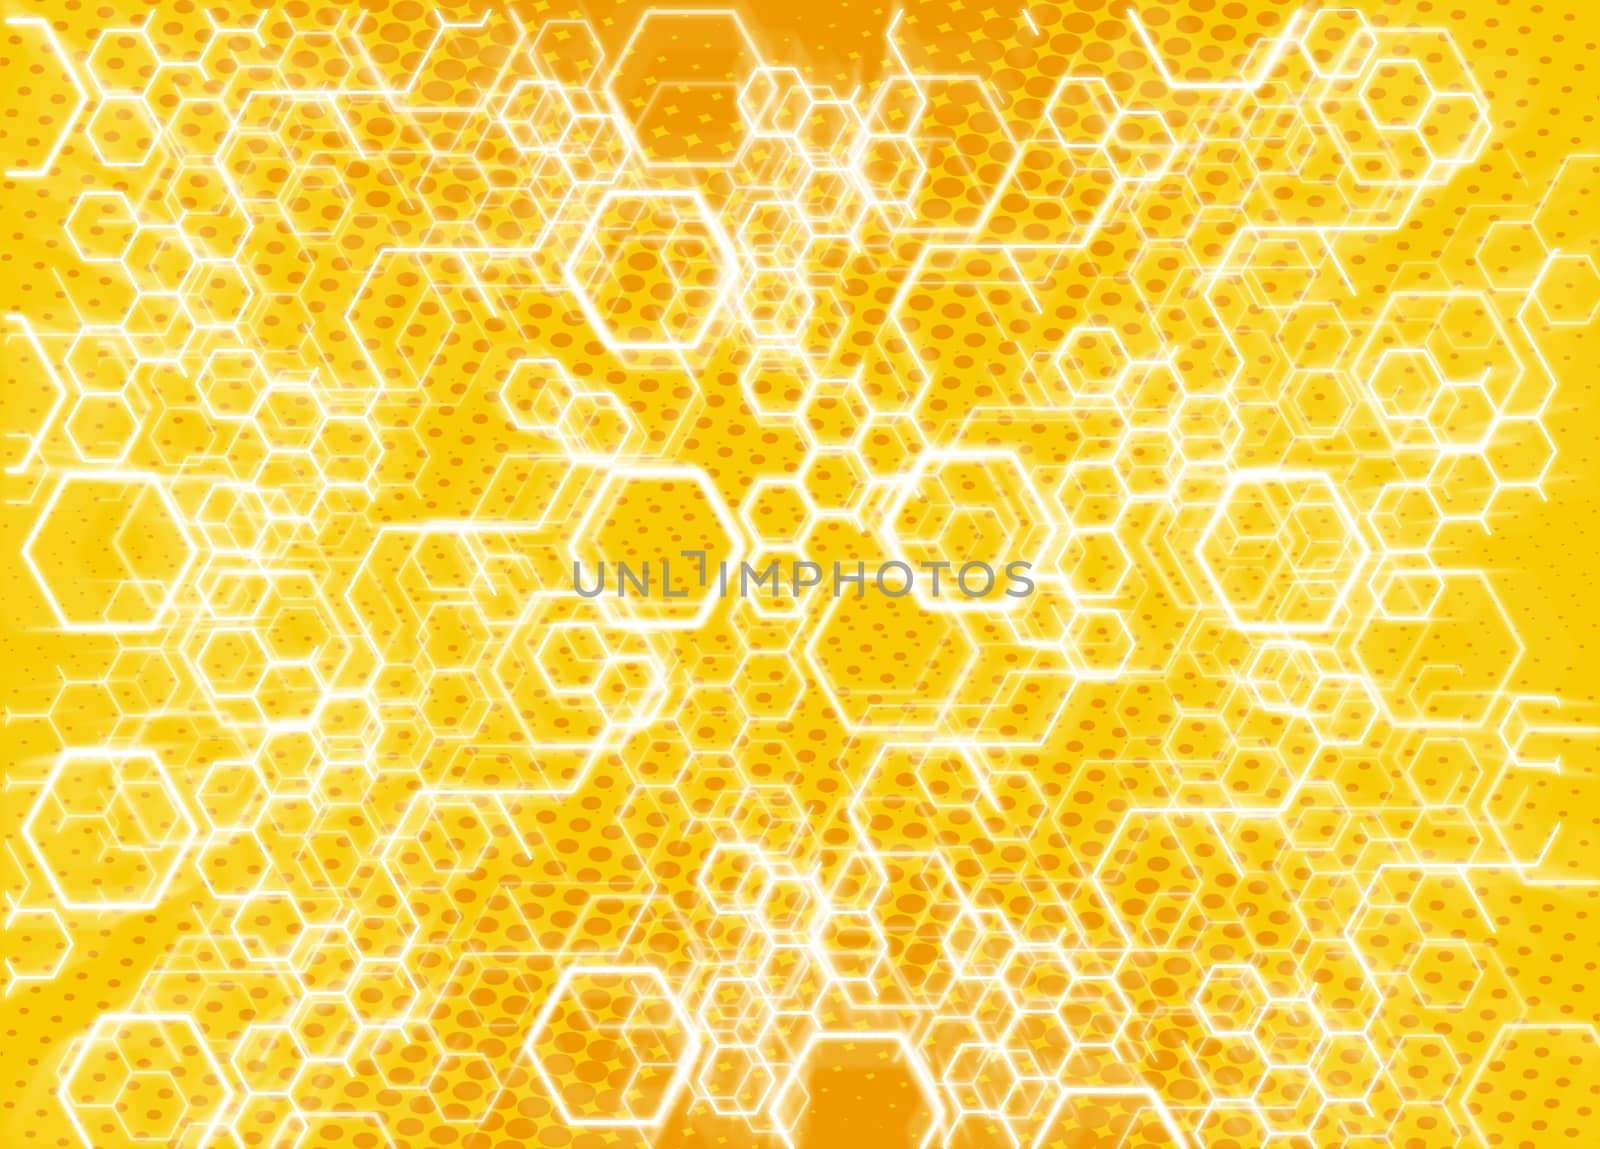 hexagons on yellow abstract background